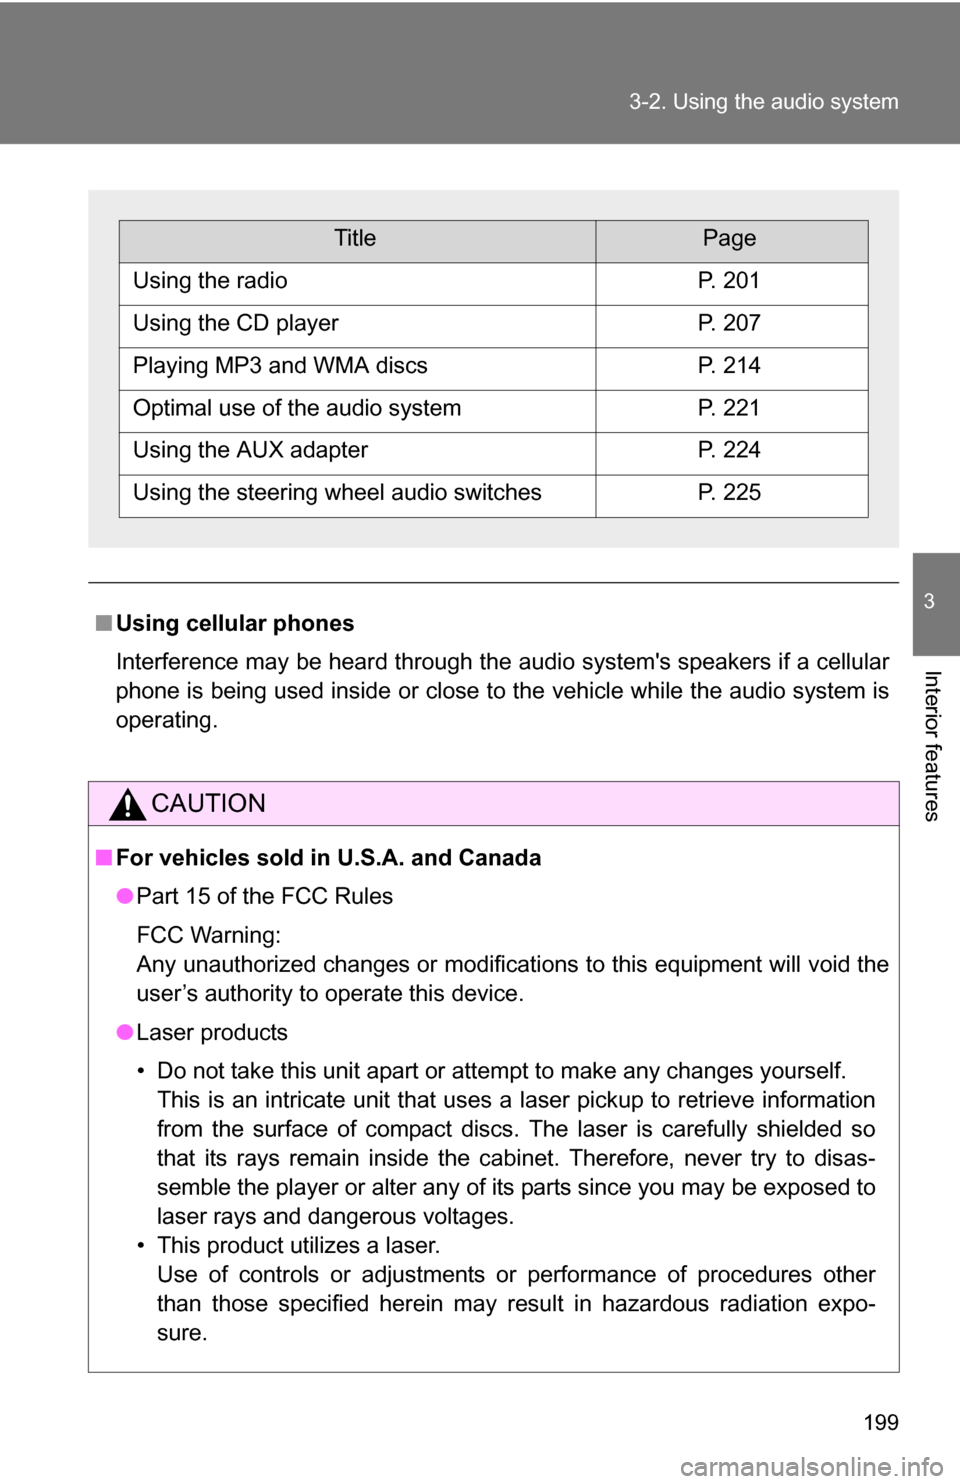 TOYOTA COROLLA 2009 10.G Owners Manual 199
3-2. Using the audio system
3
Interior features
■
Using cellular phones
Interference may be heard through the audio systems speakers if a cellular
phone is being used inside or close to the veh